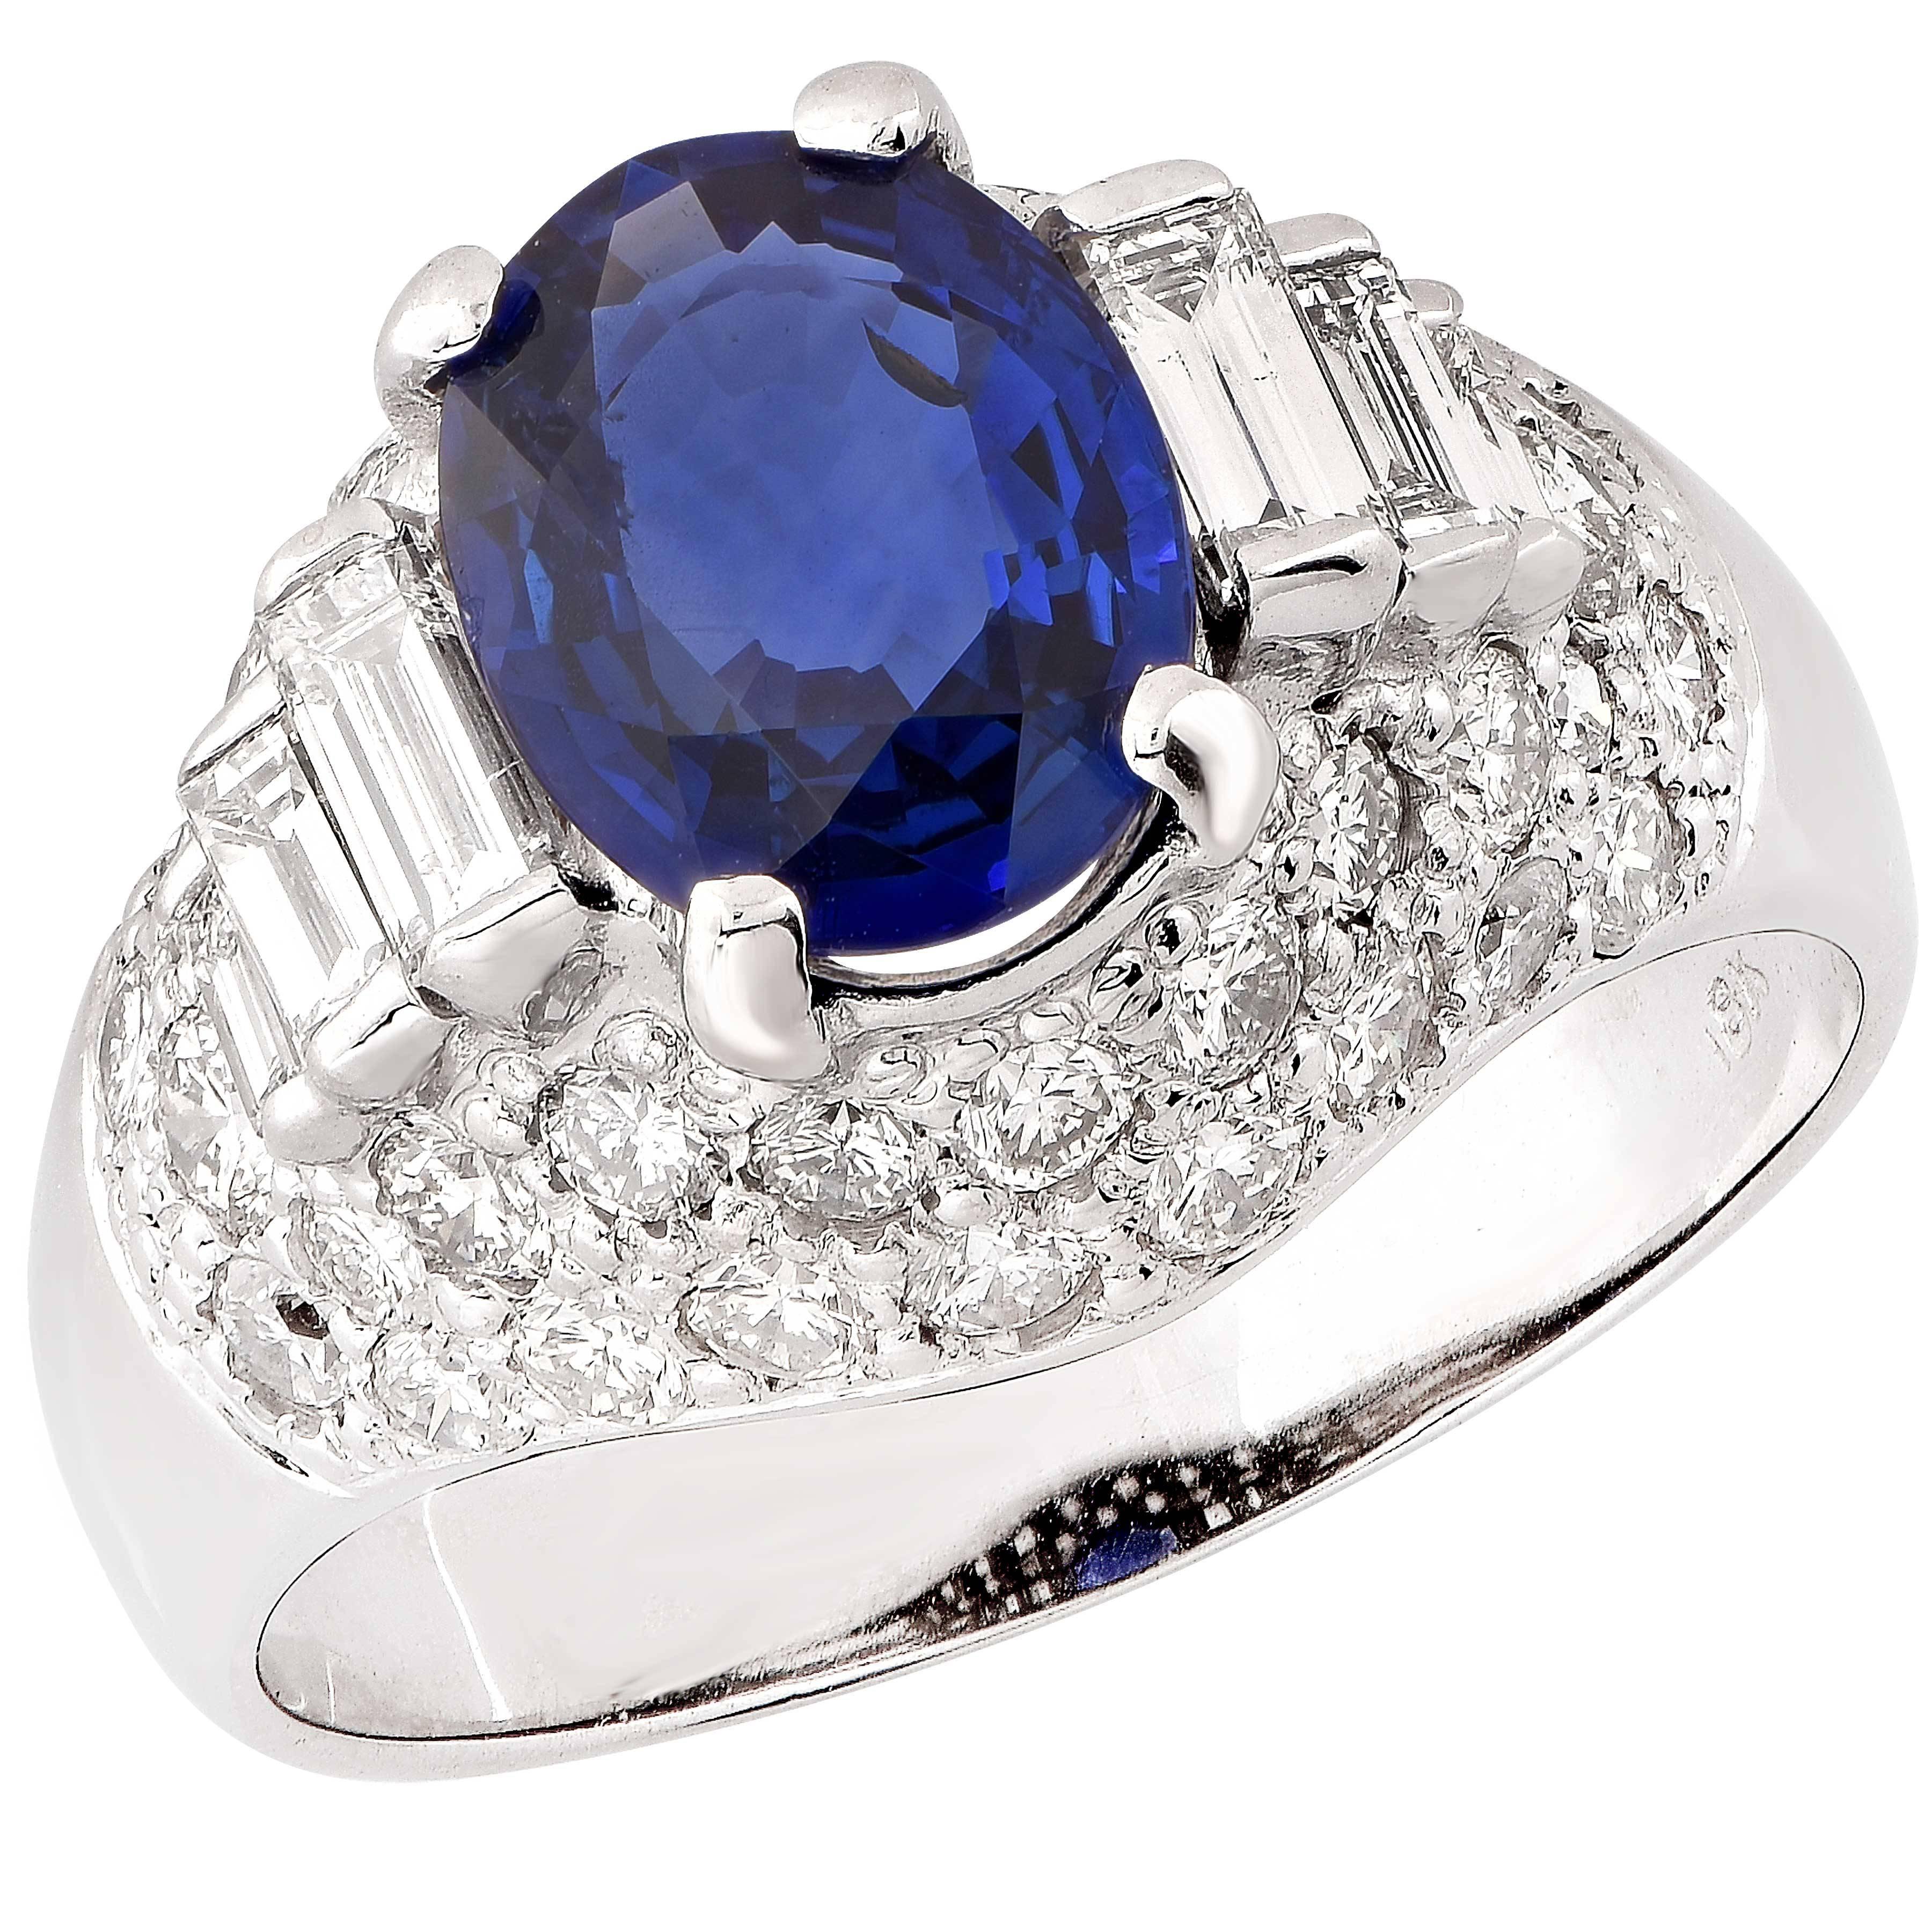 3.98 Carat Natural Blue Sapphire and Diamond Ring